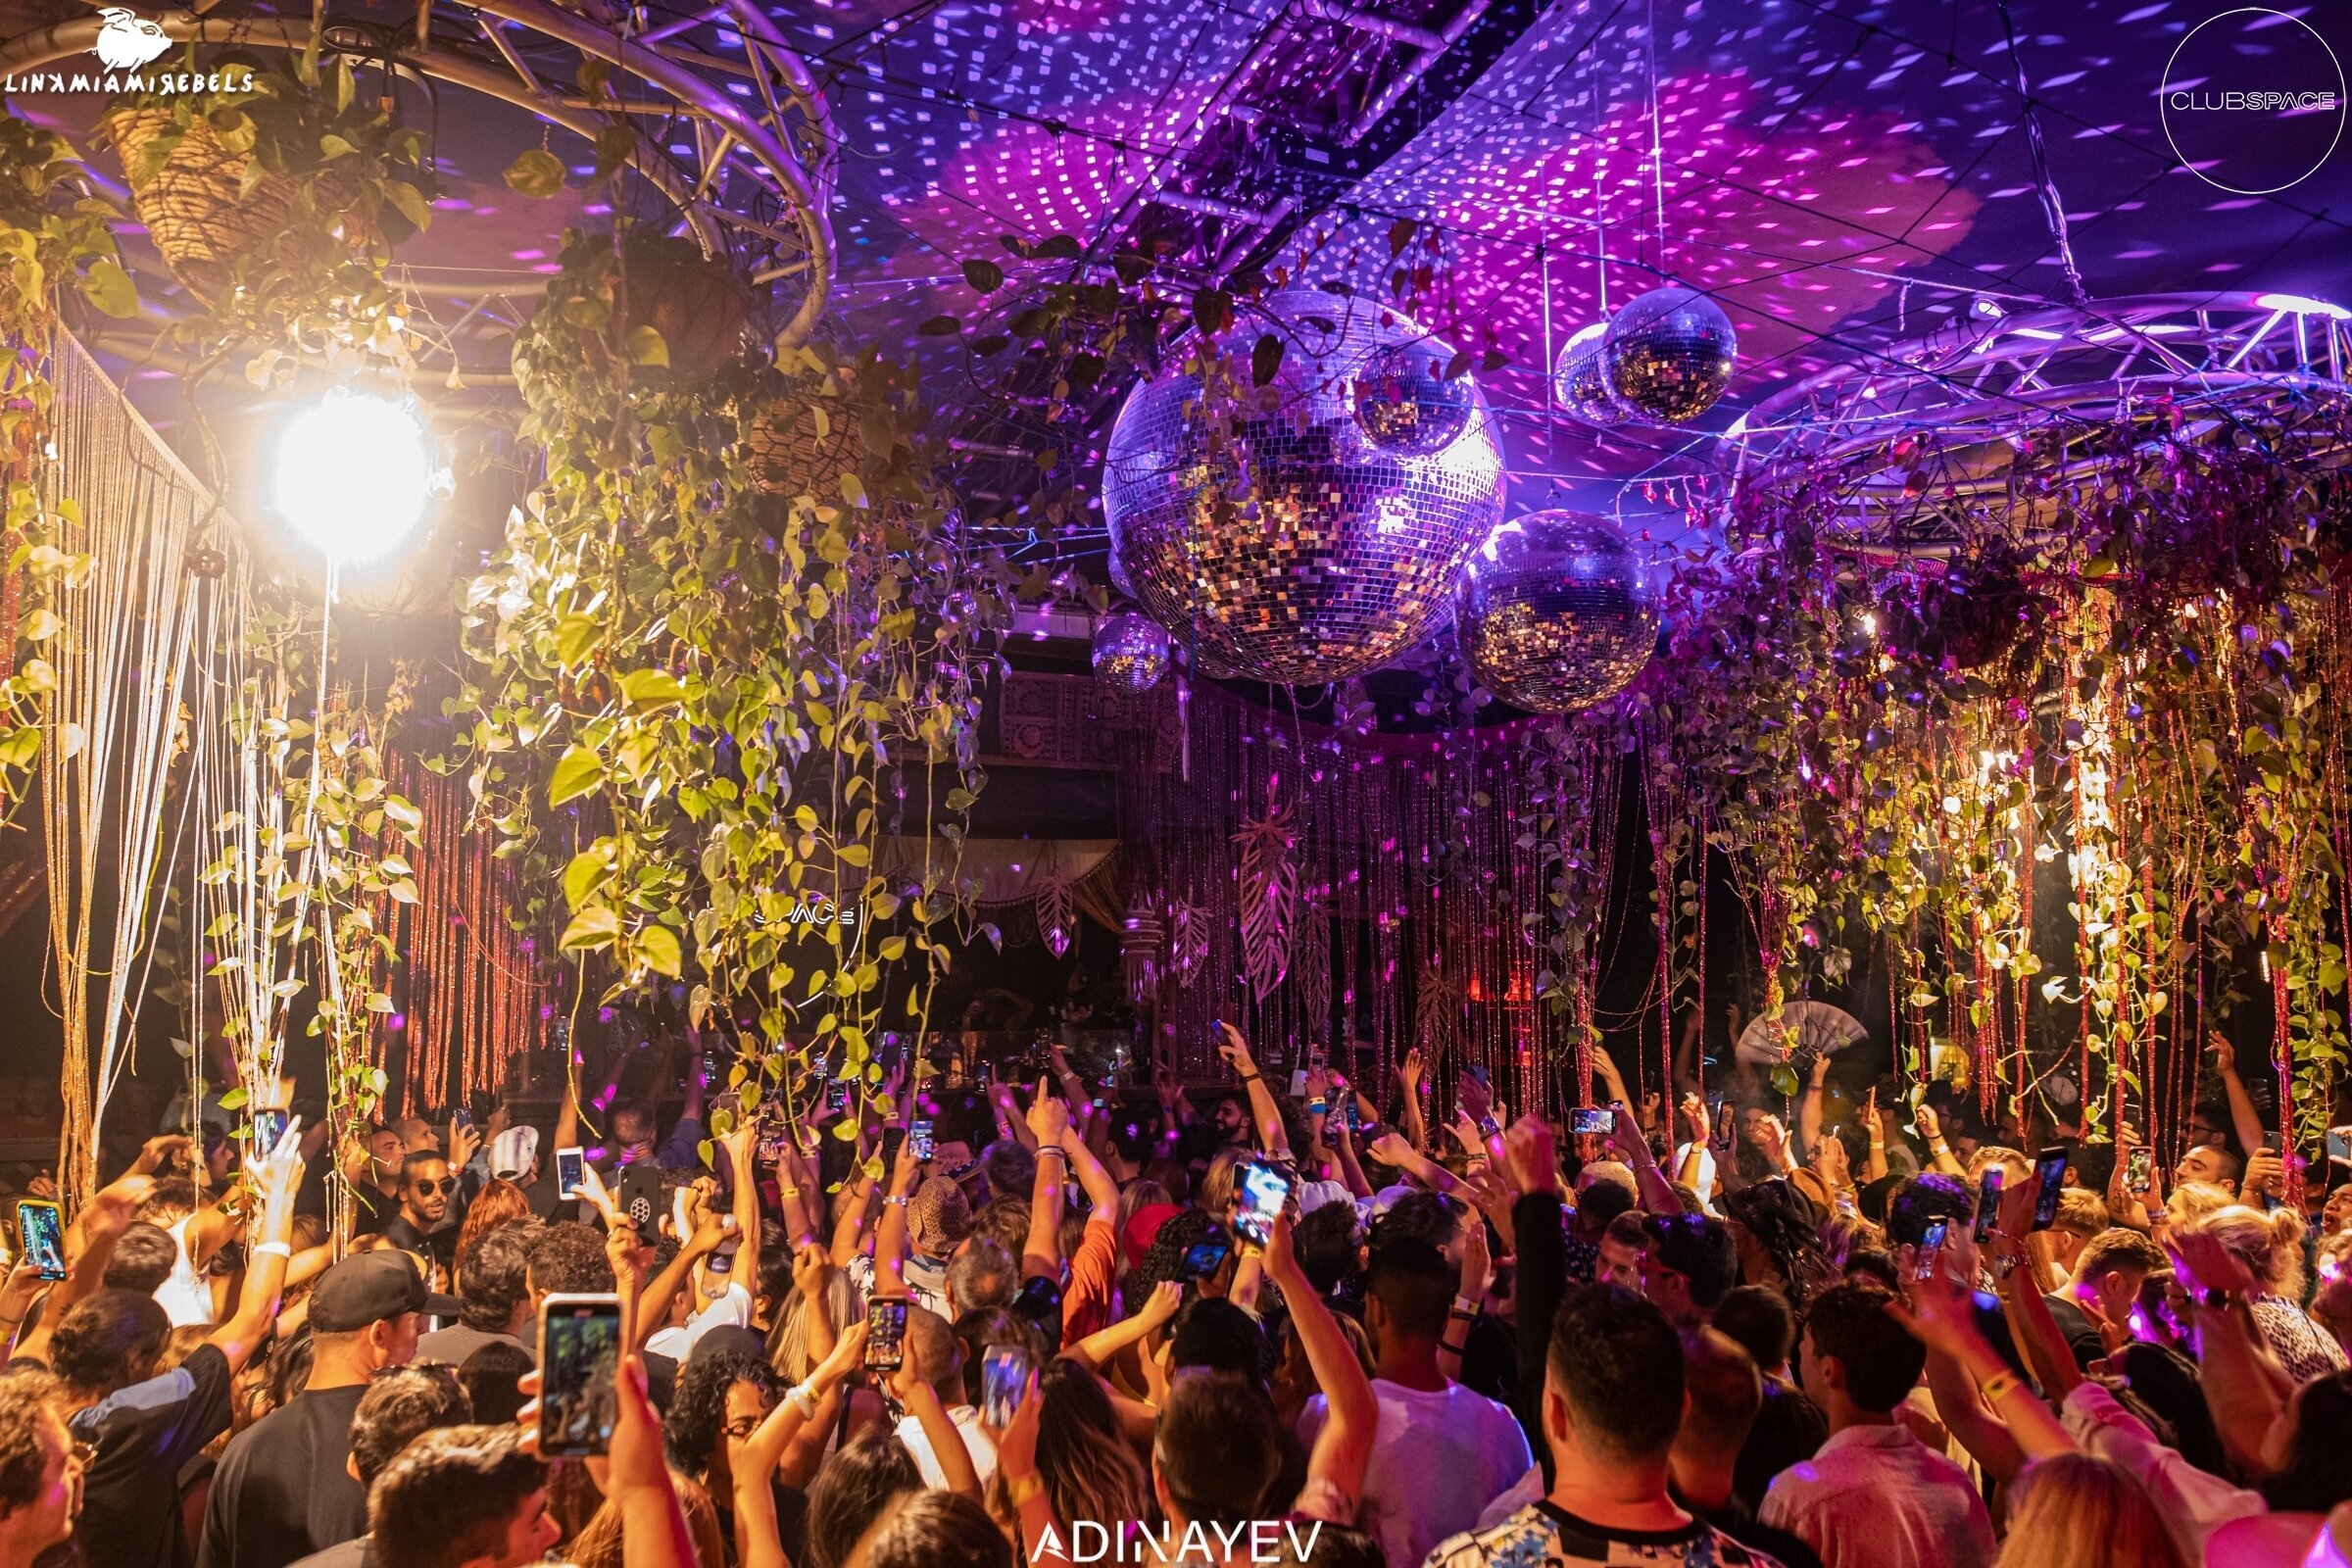 Miami's Club Space to reopen this weekend with strict COVID-19